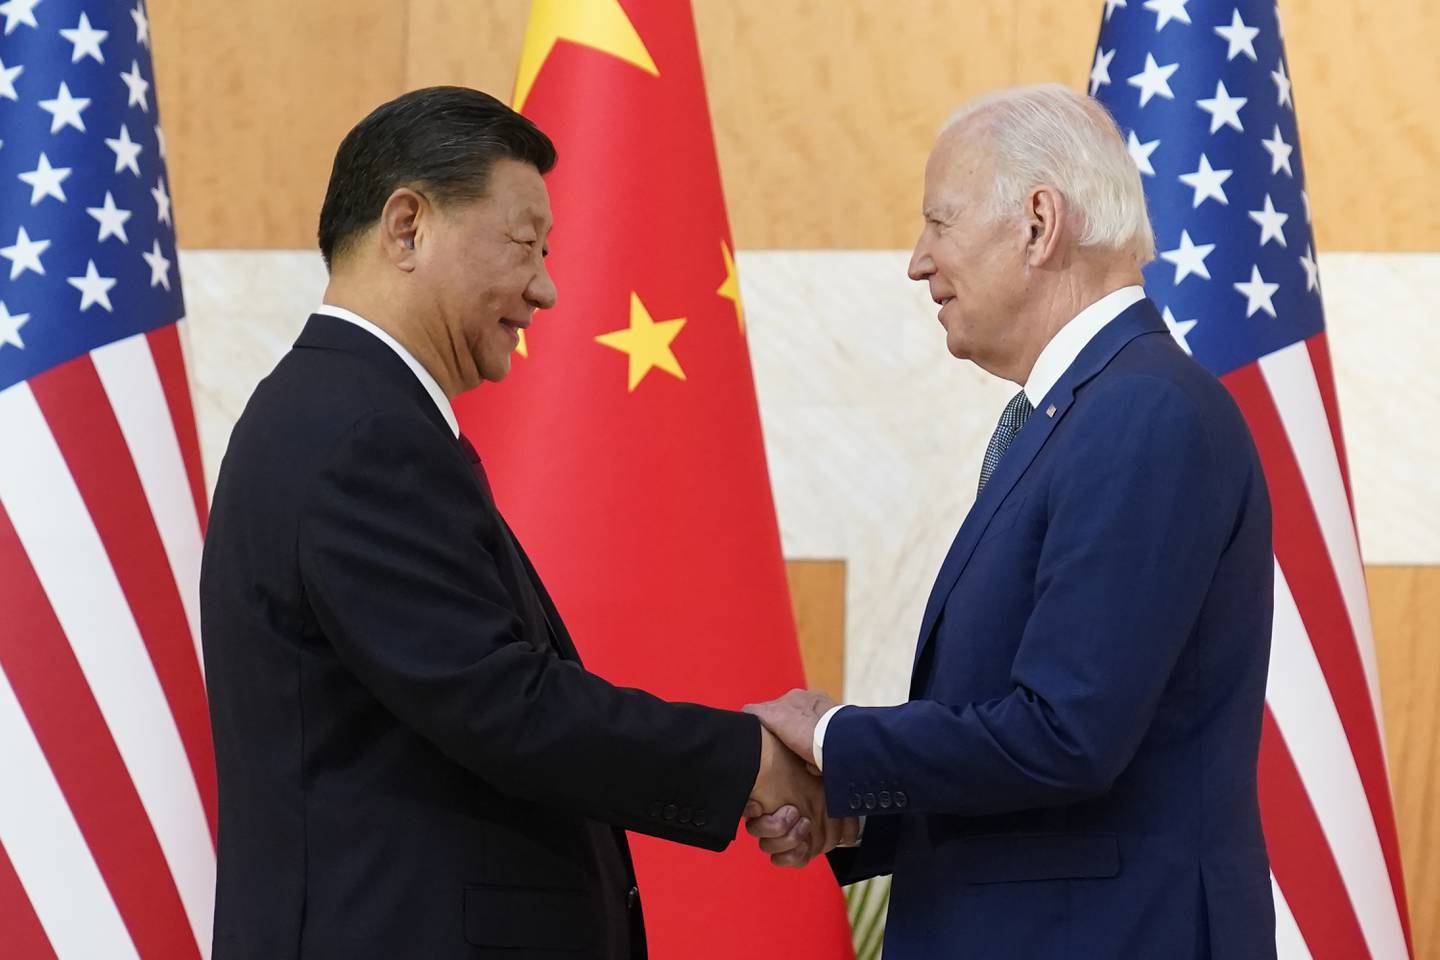 Secretary of State Antony Blinken's visit to Beijing, now postponed, was announced after US President Joe Biden and Chinese President Xi Jinping met on the sidelines of the G20 summit in Indonesia last year. AP